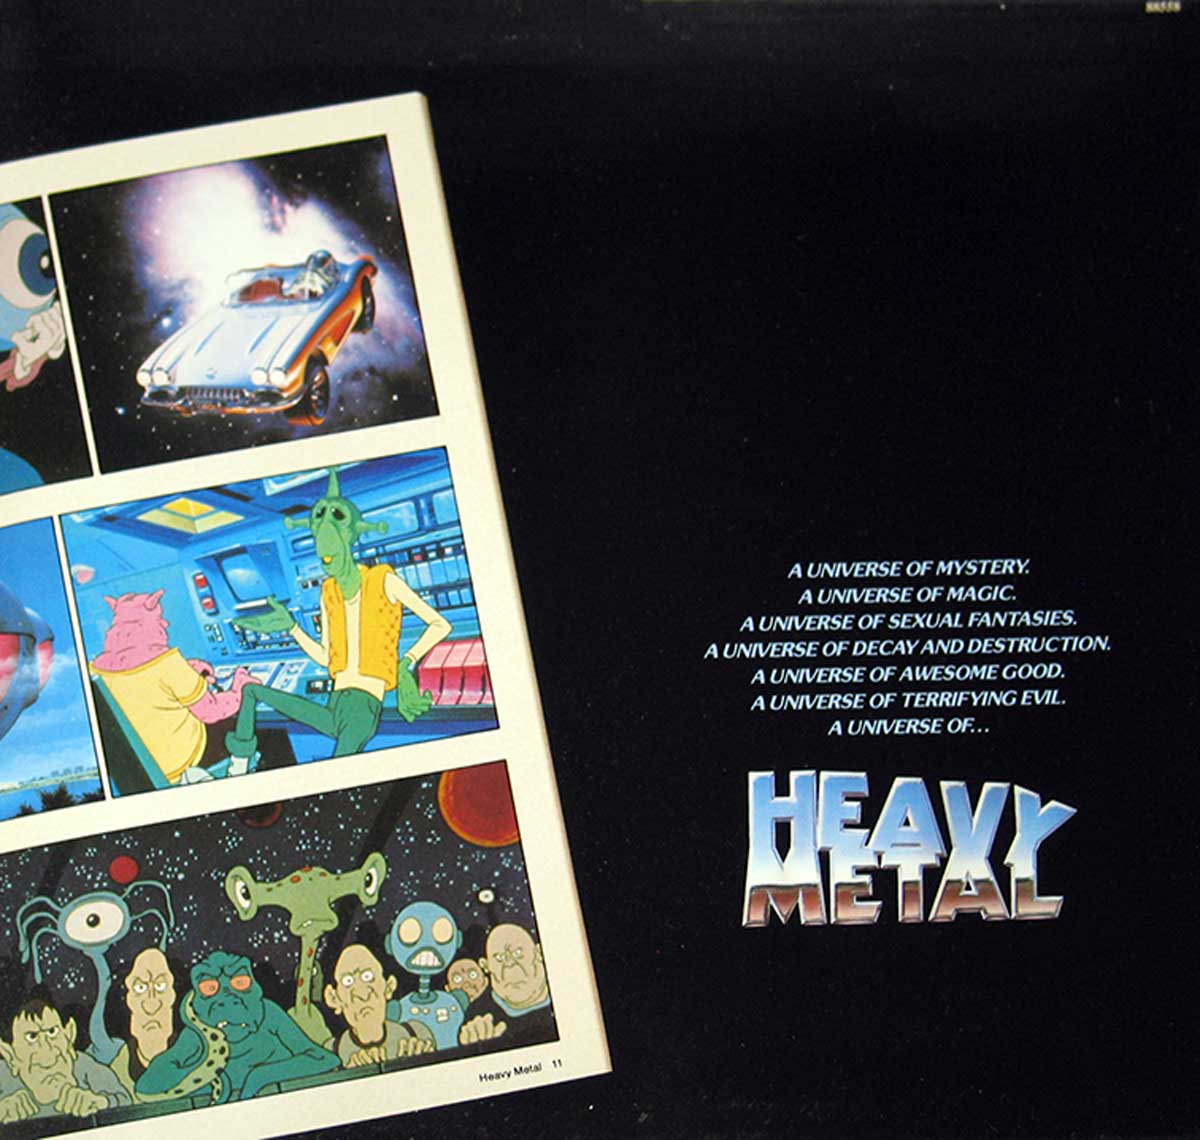 Inner Cover   of "Heavy Metal Music from the Motion Picture" Album 